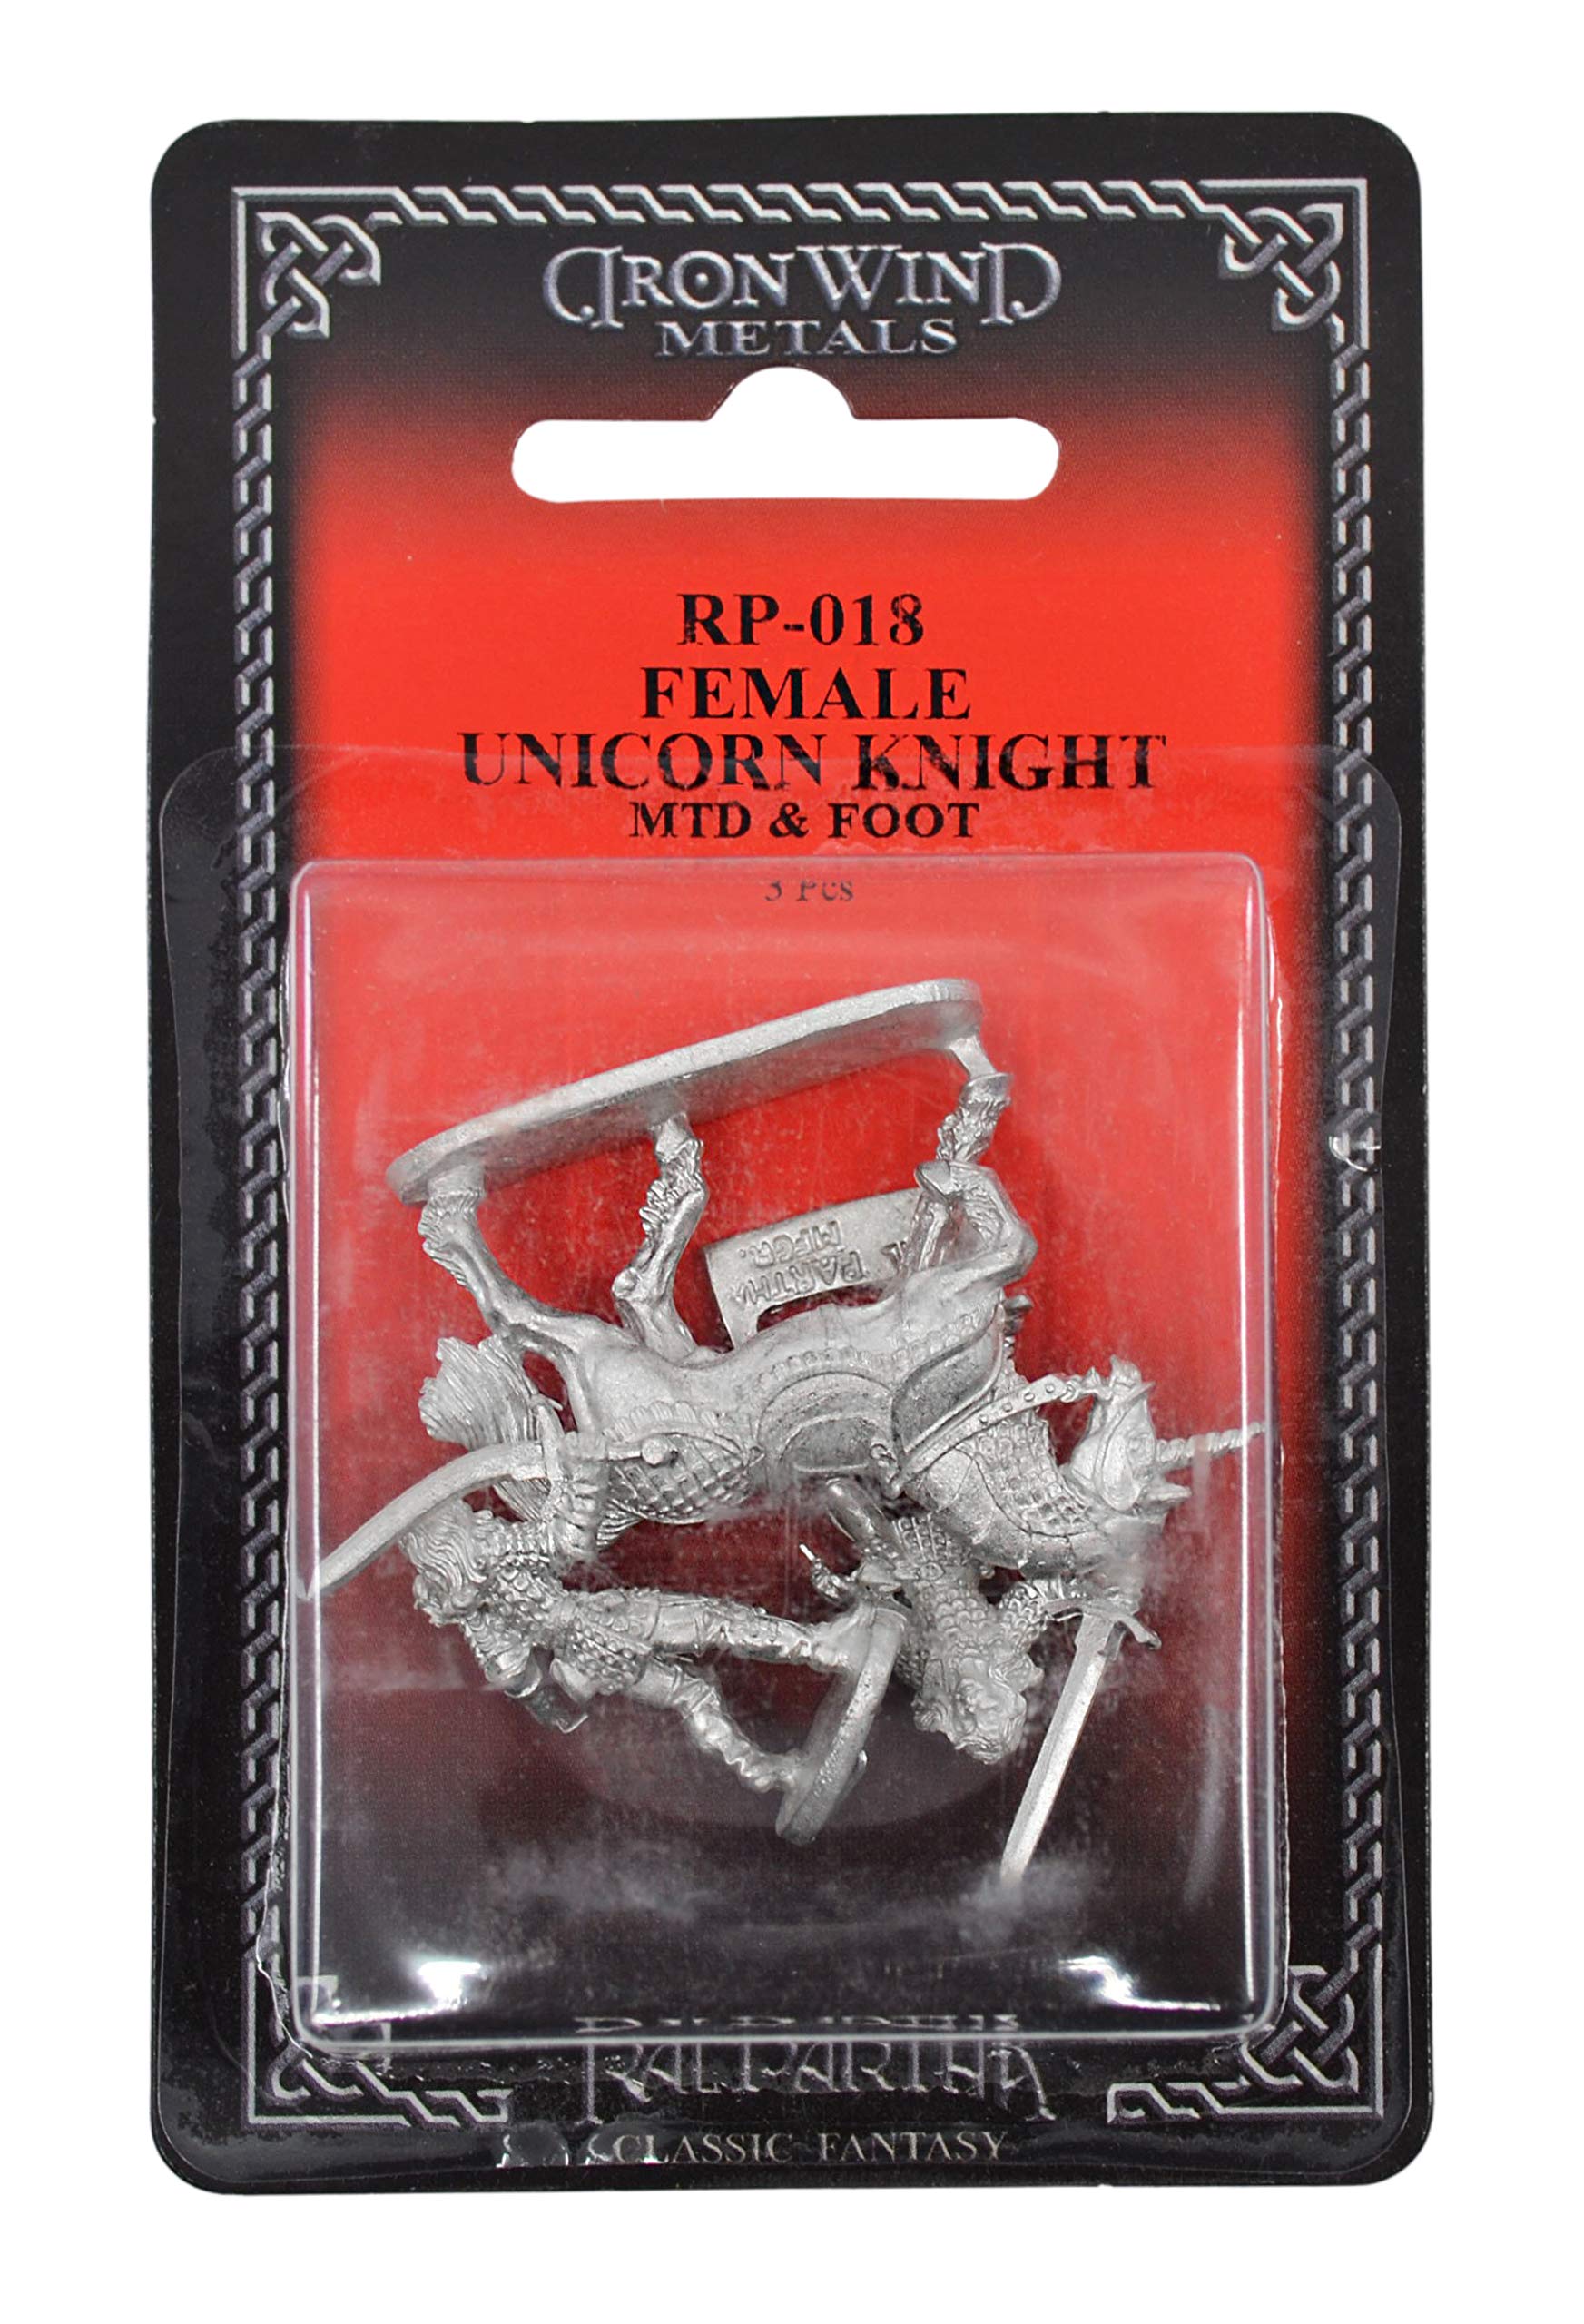 IRON WIND METALS 3 Piece Female Unicorn Knight Set - 100% Lead-Free Pewter - Classic Fantasy Miniatures for 28mm Table Top Games - Made in USA - RAL Partha Miniatures